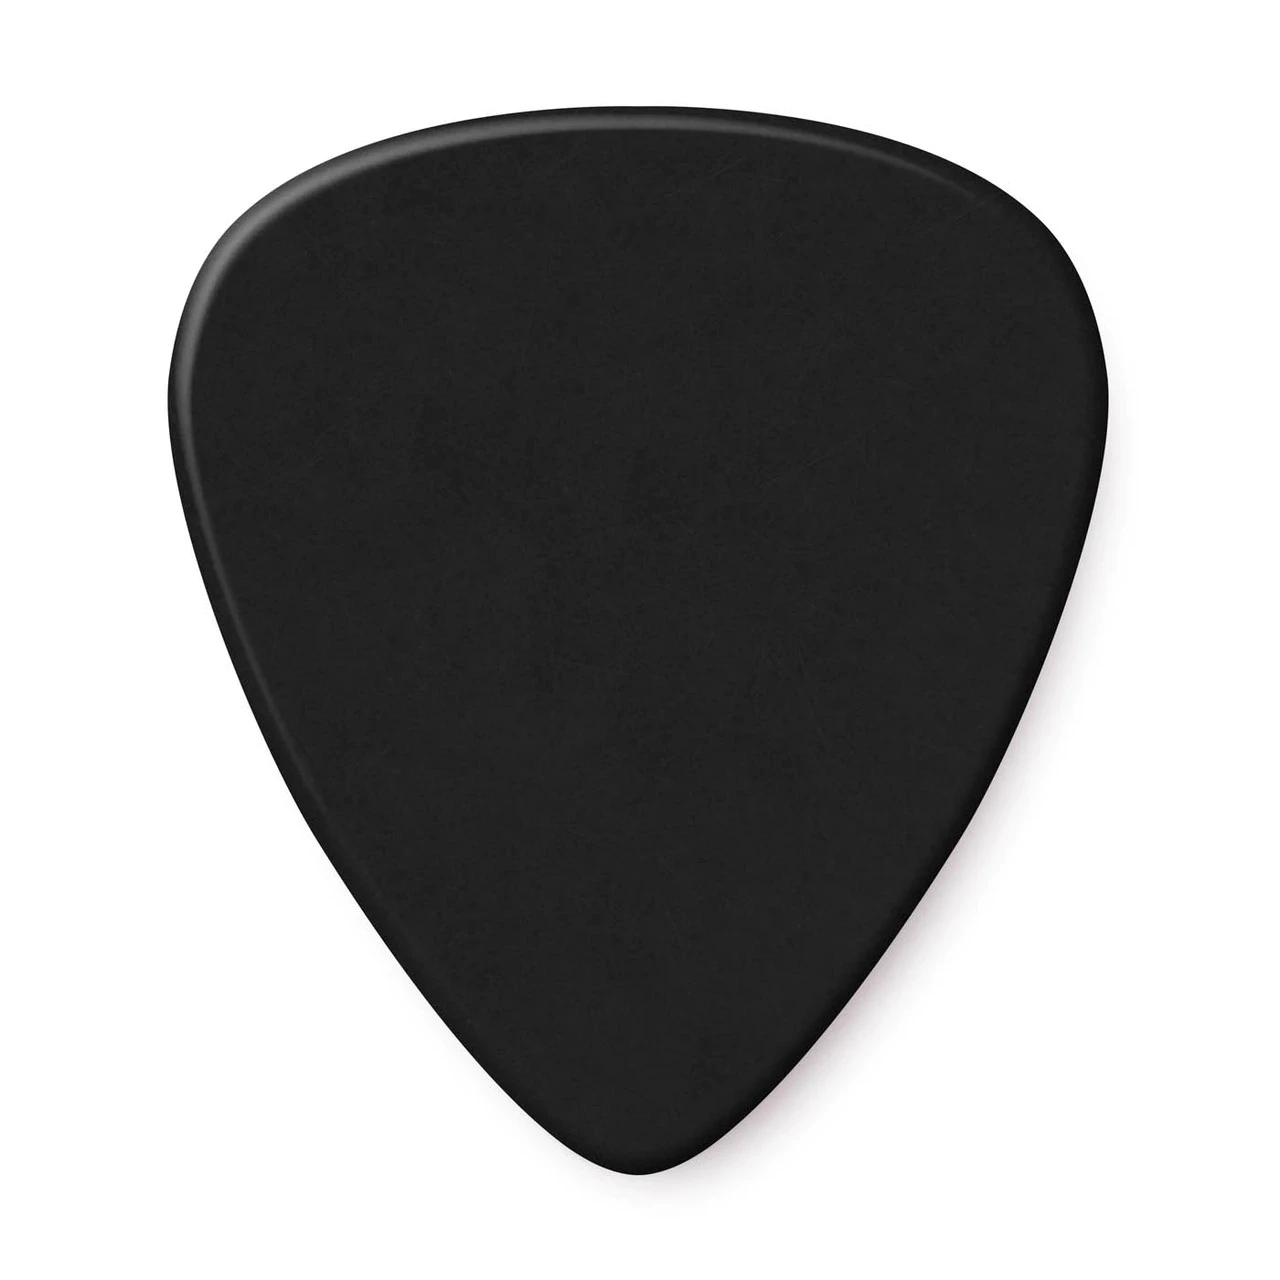 Guitar Picks Lucite Guitar Accessory , Find Complete Details about Custom B...